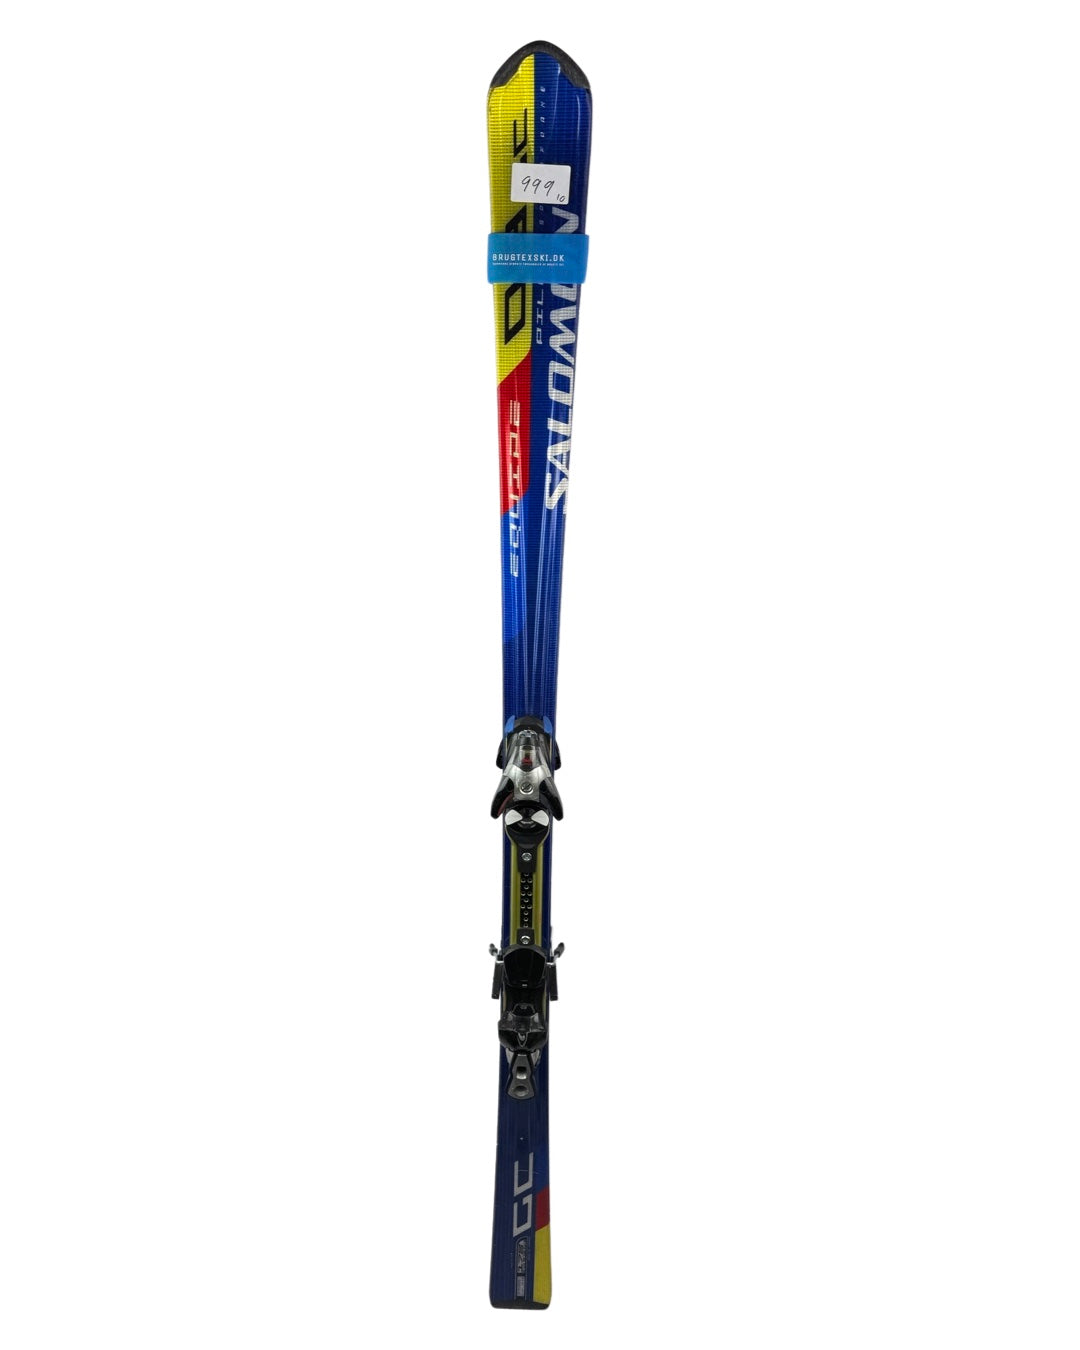 Adult skis - mixed 999